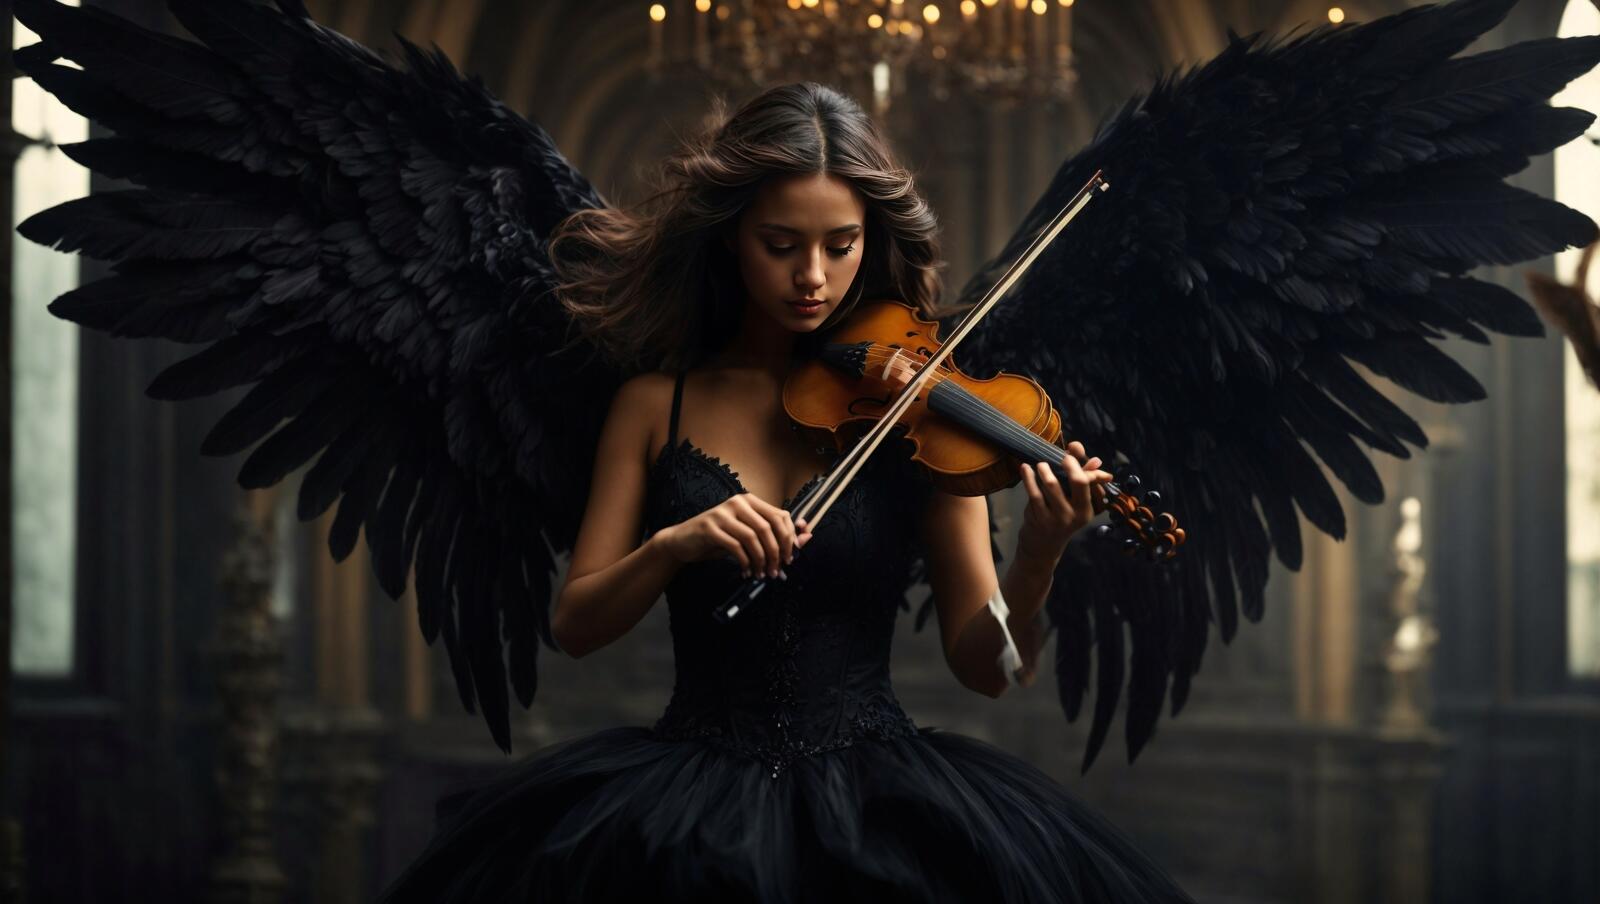 Free photo A woman with a violin and wings, standing.